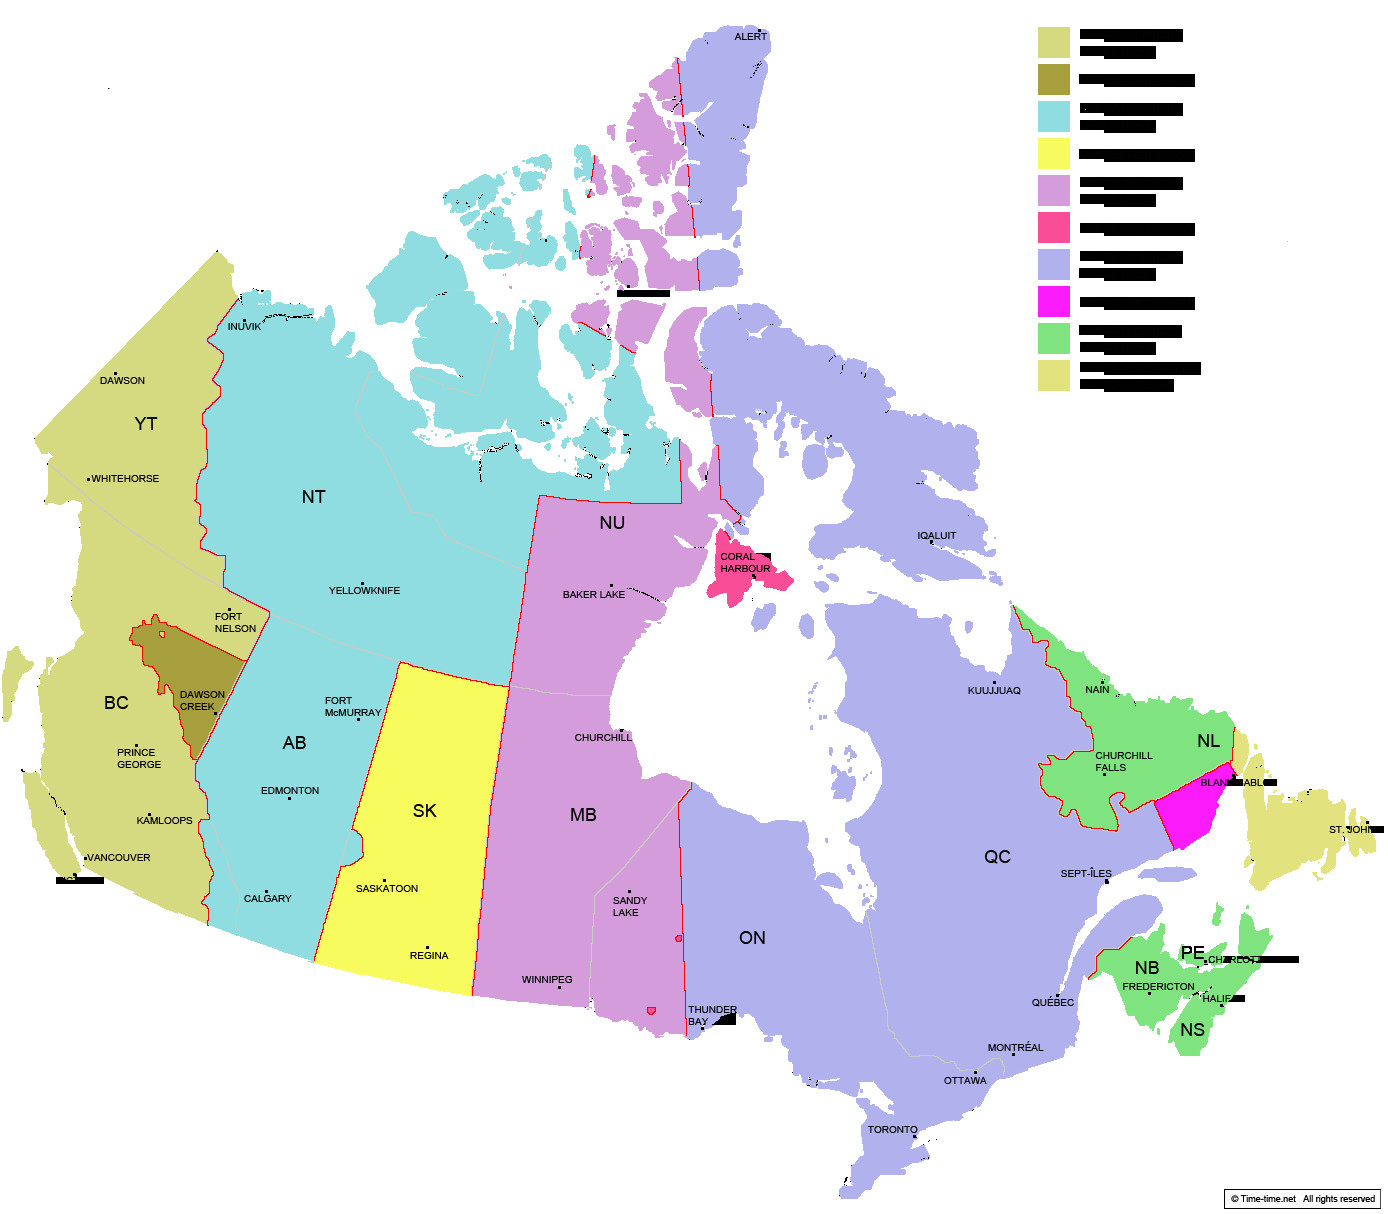 Map Of Canada with Time Zones Canada Time Zone Map with Provinces with Cities with